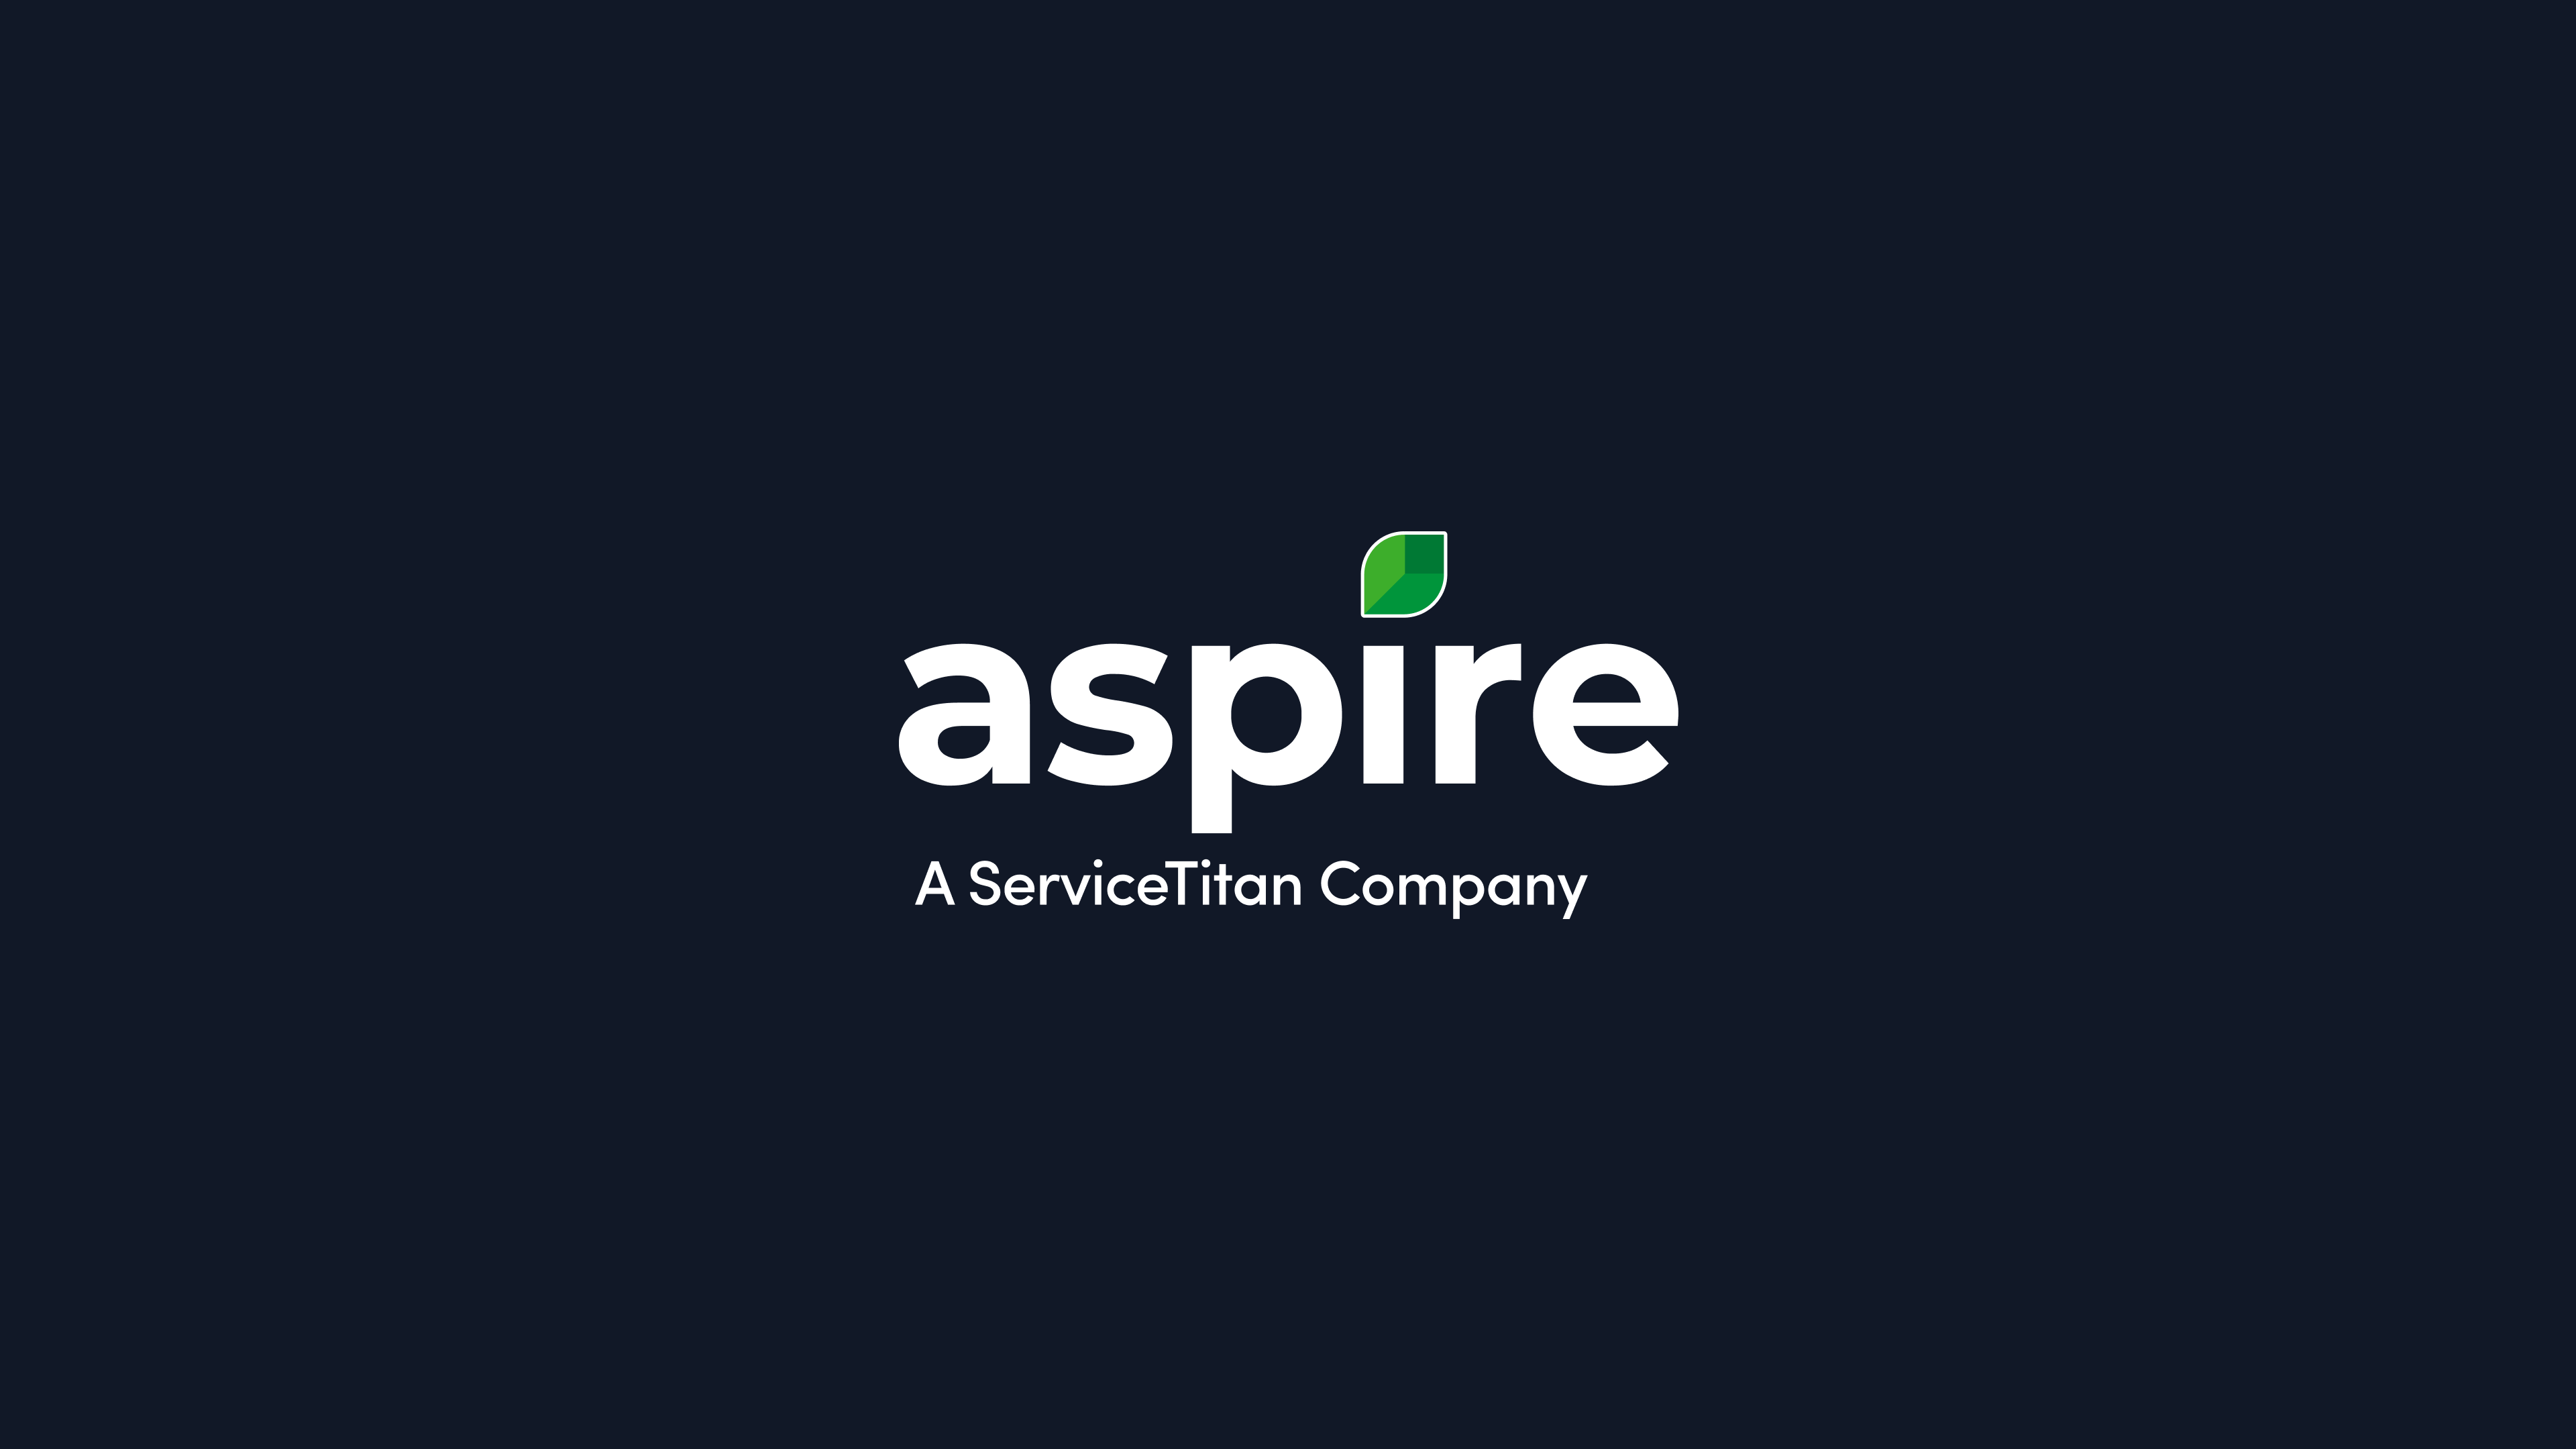 Dan Blake joins Aspire Software as Chief Technology Officer